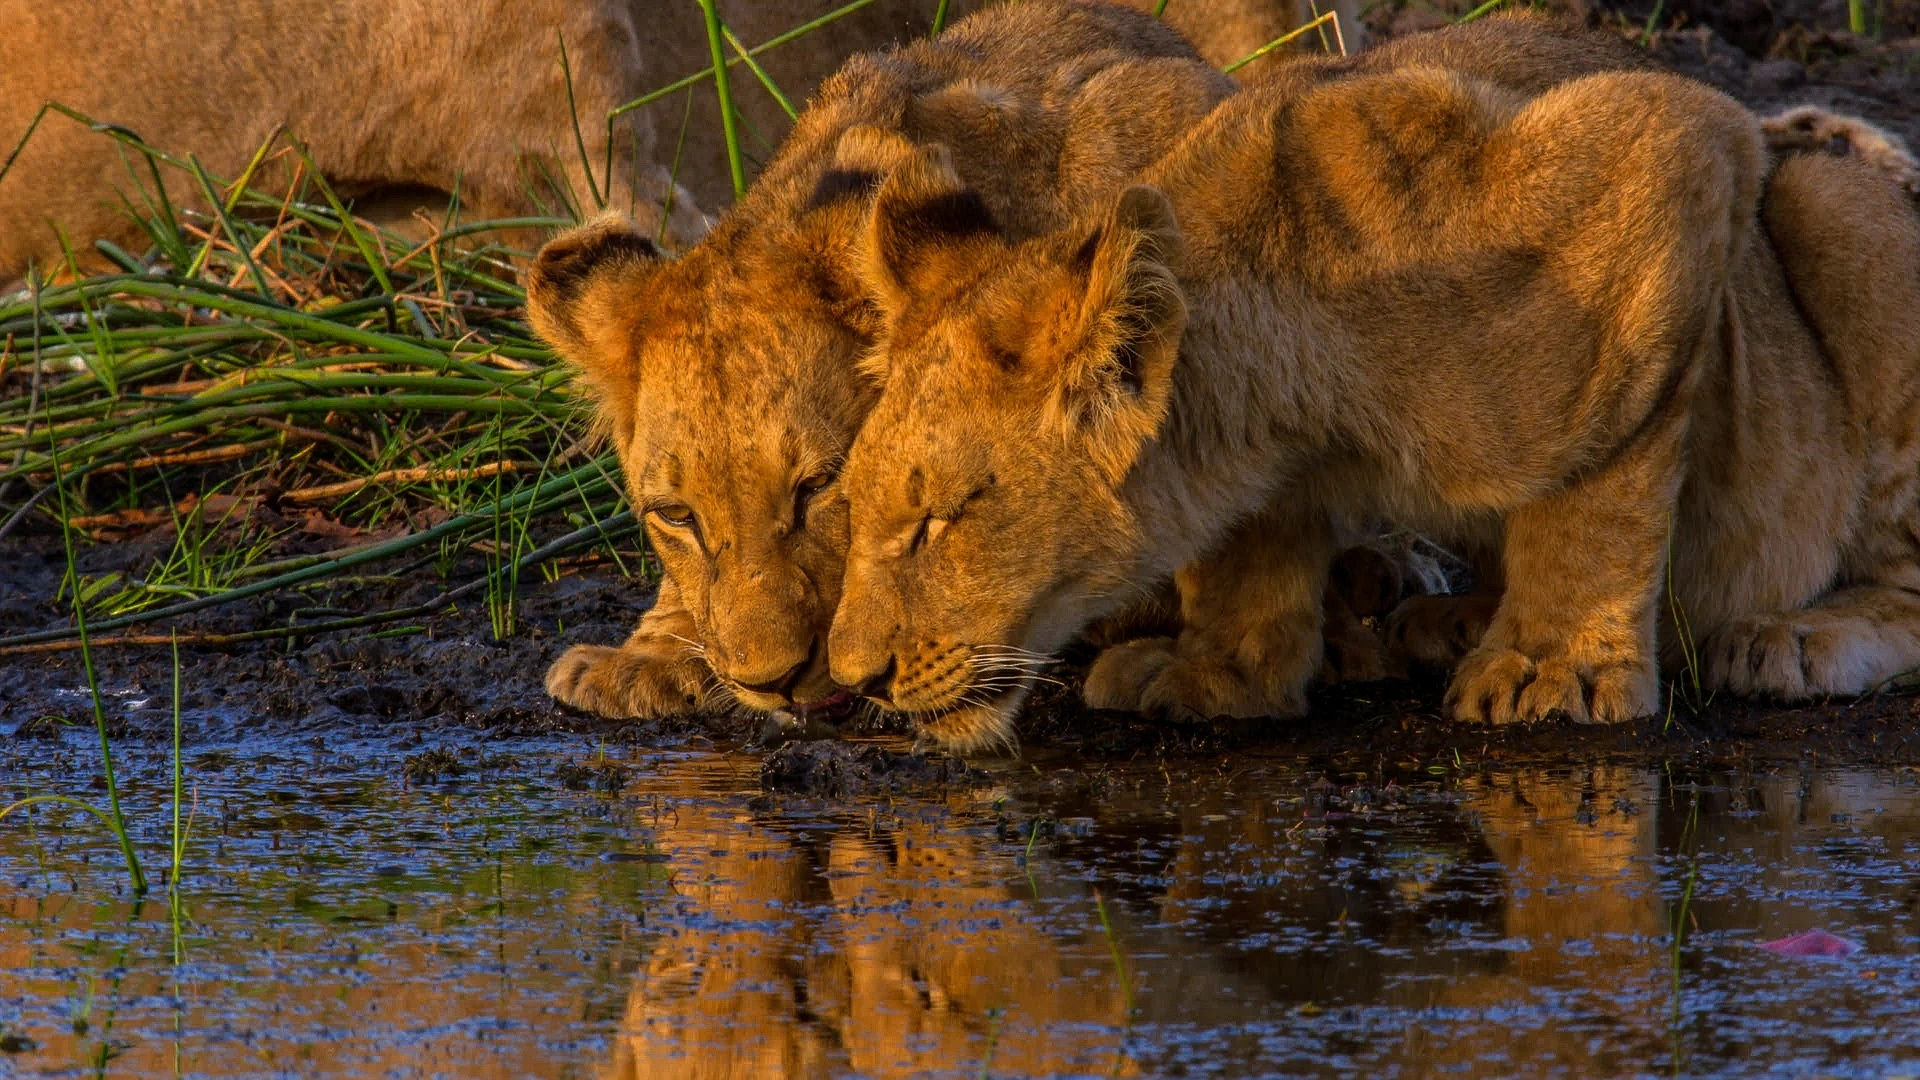 Honeymoon safari packages south africa - Lions taking water in Kruger National Park, south Africa